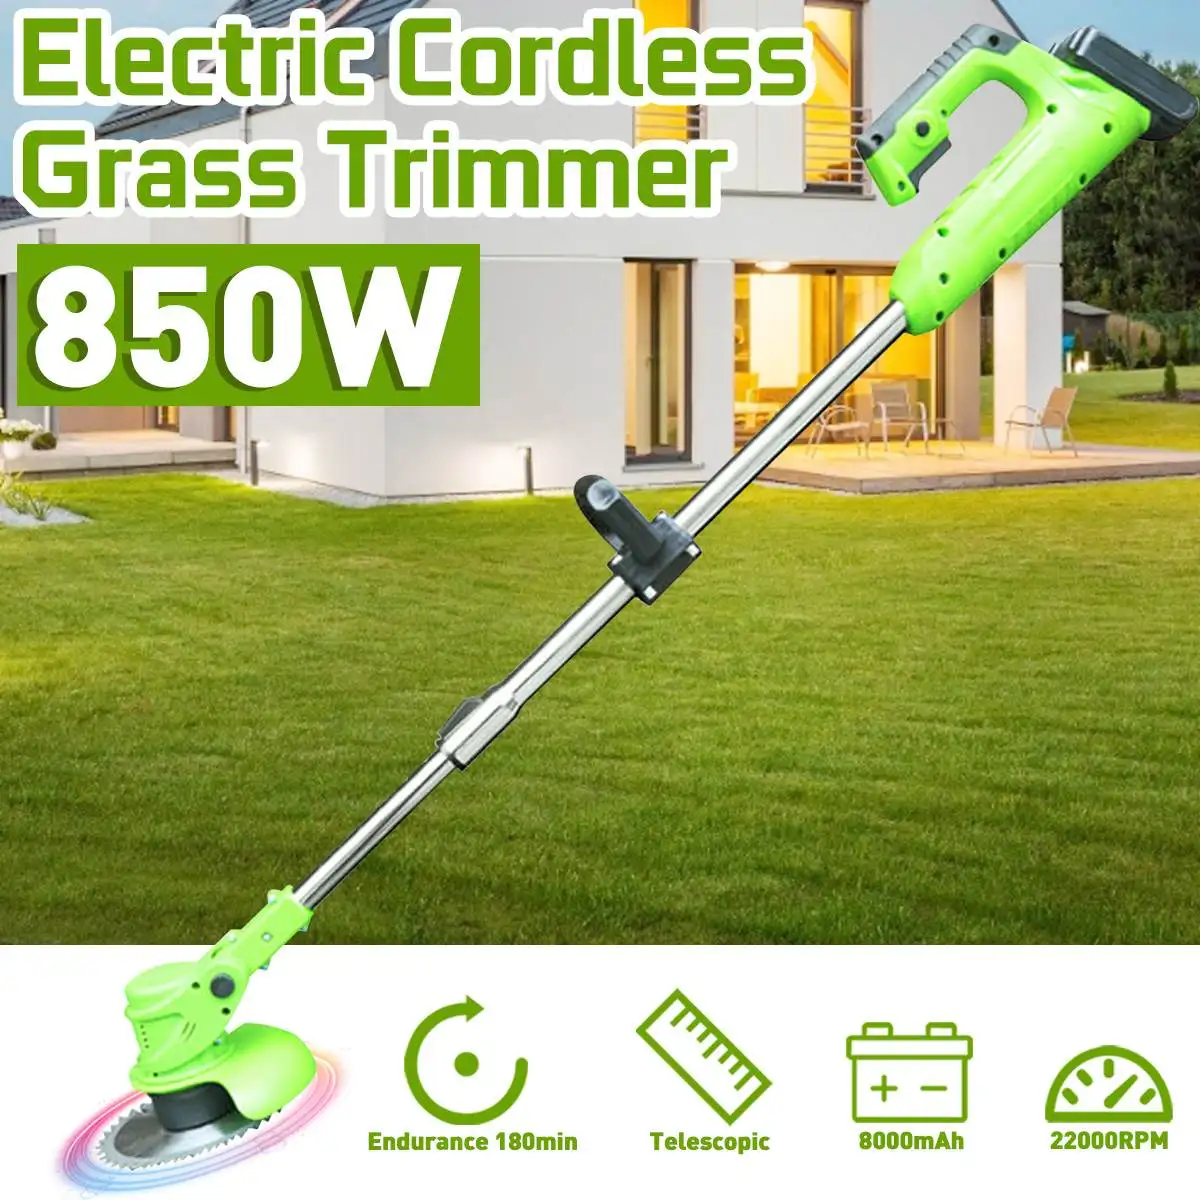 850W 12V/24V Electric Cordless Grass Trimmer With 8000mAh Battery Lawn Mower Weeds Cutter Machine Length Adjustable Garden Tools